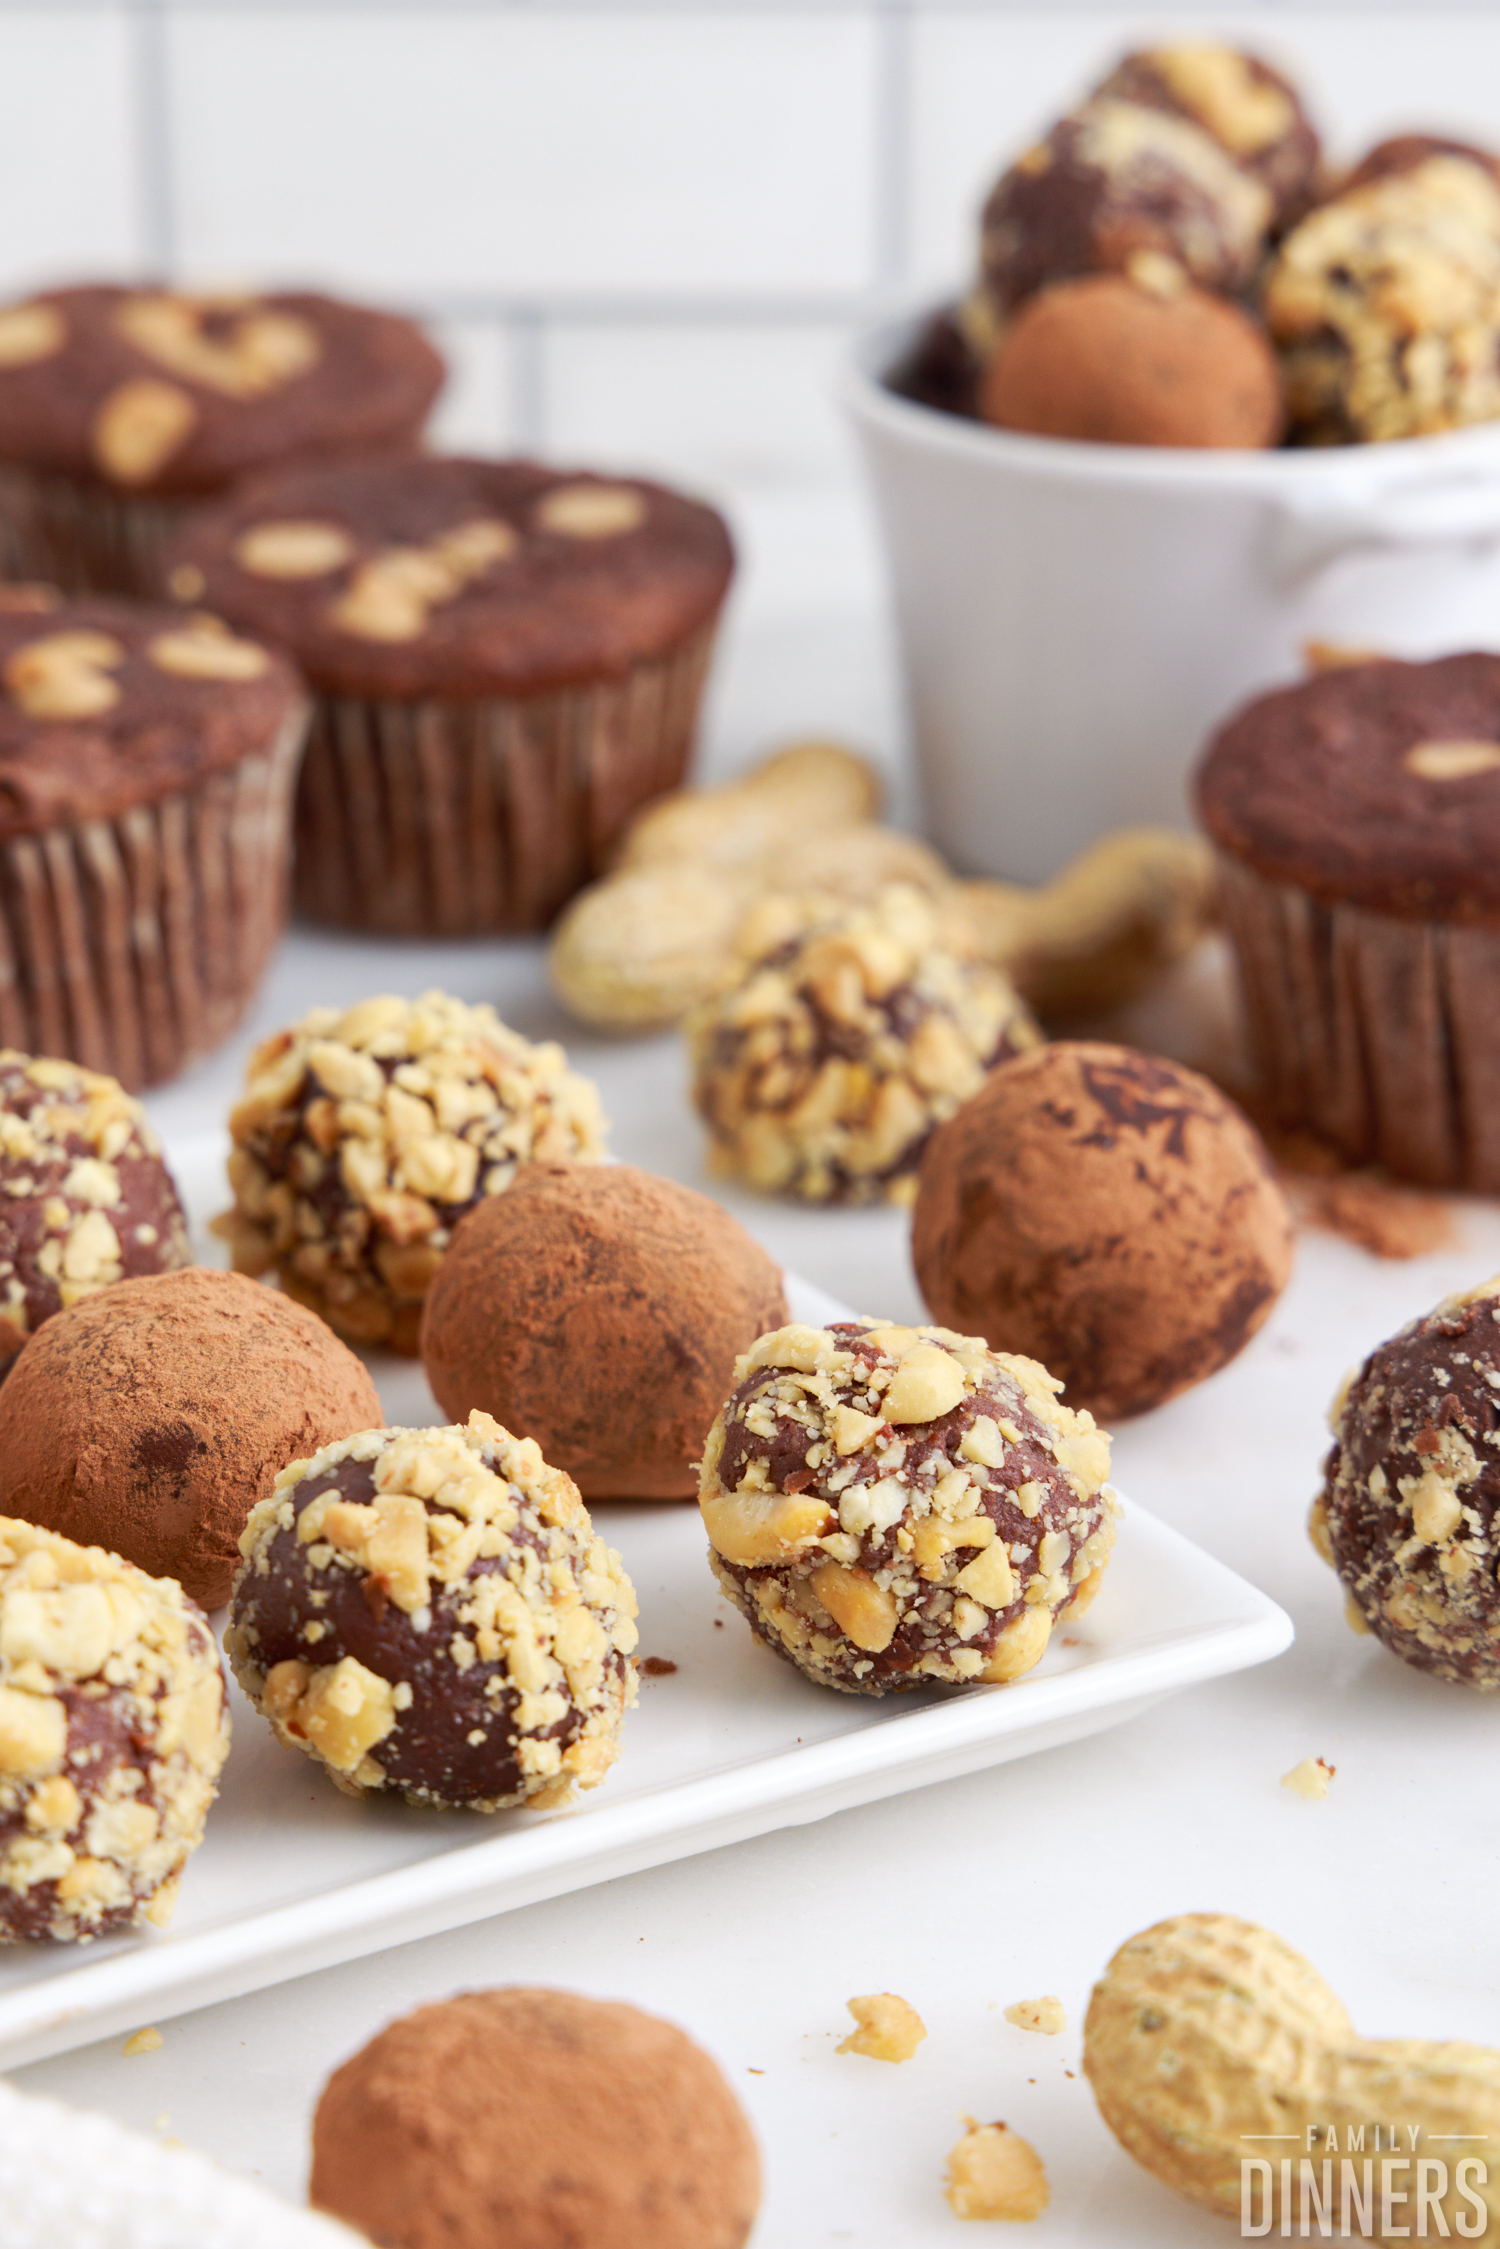 a batch of peanut butter truffles on a tray next to chocolate muffins